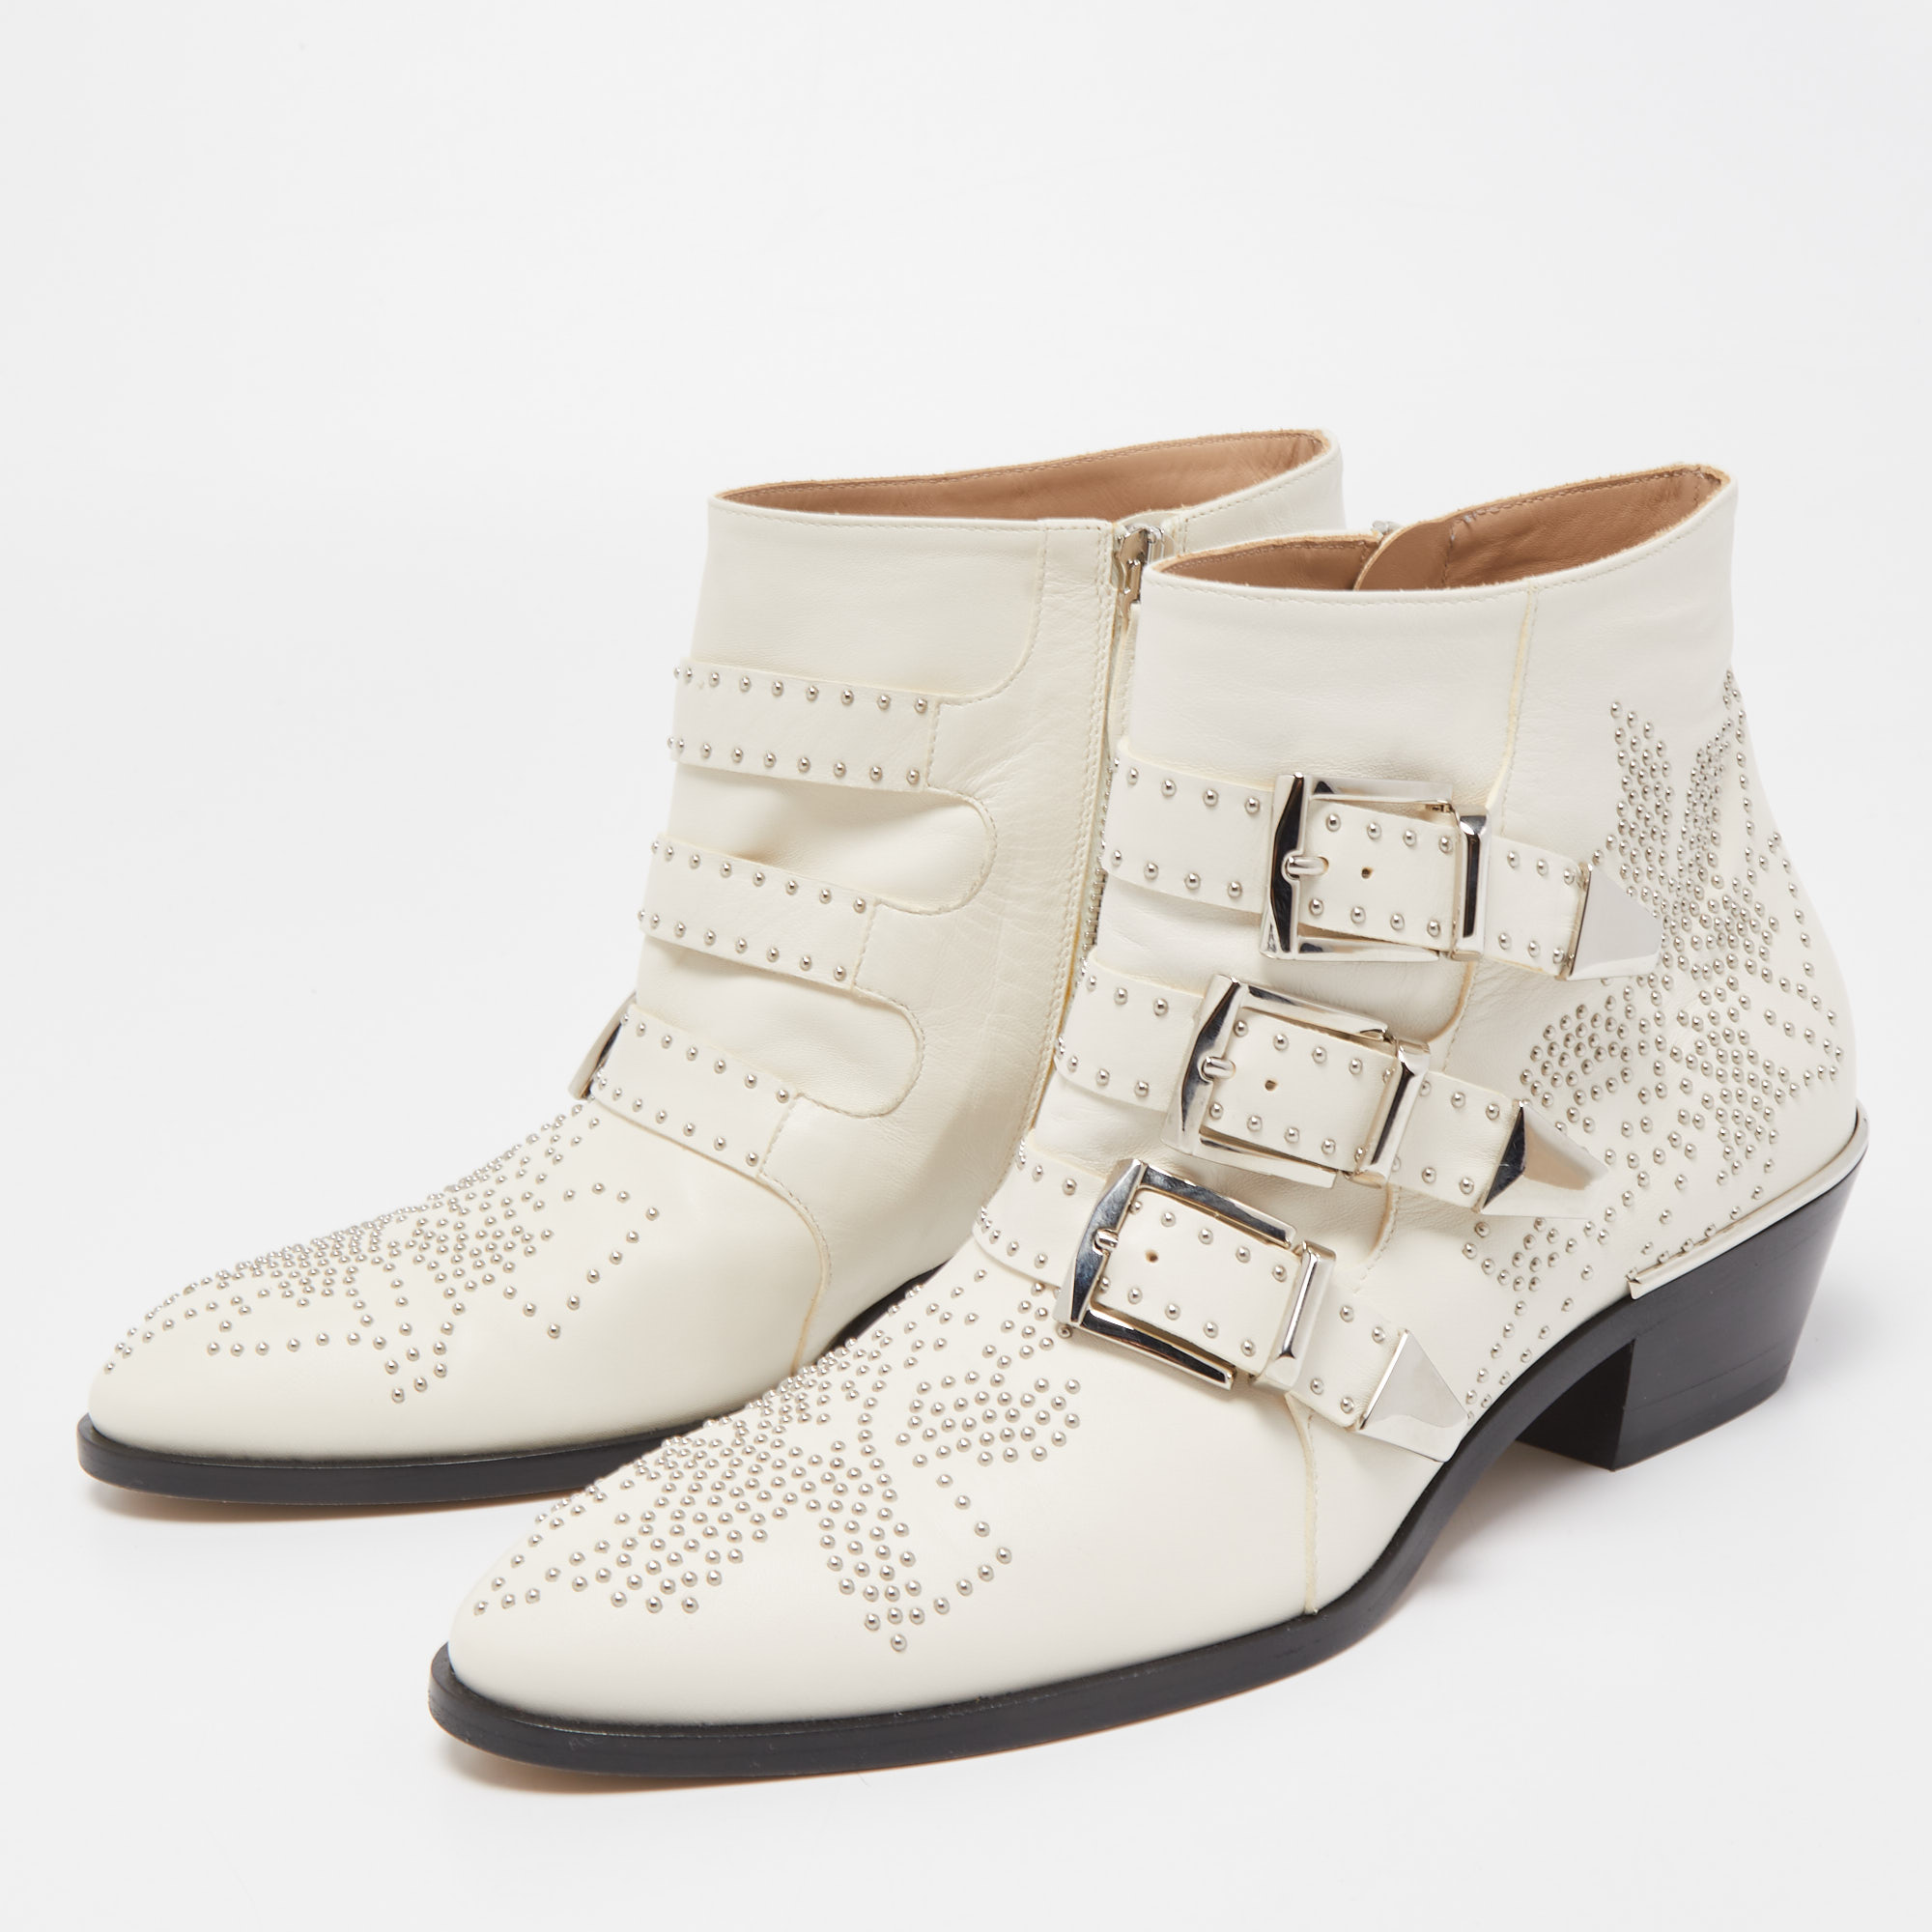 

Chloe Off White Studded Leather Susanna Ankle Boots Size